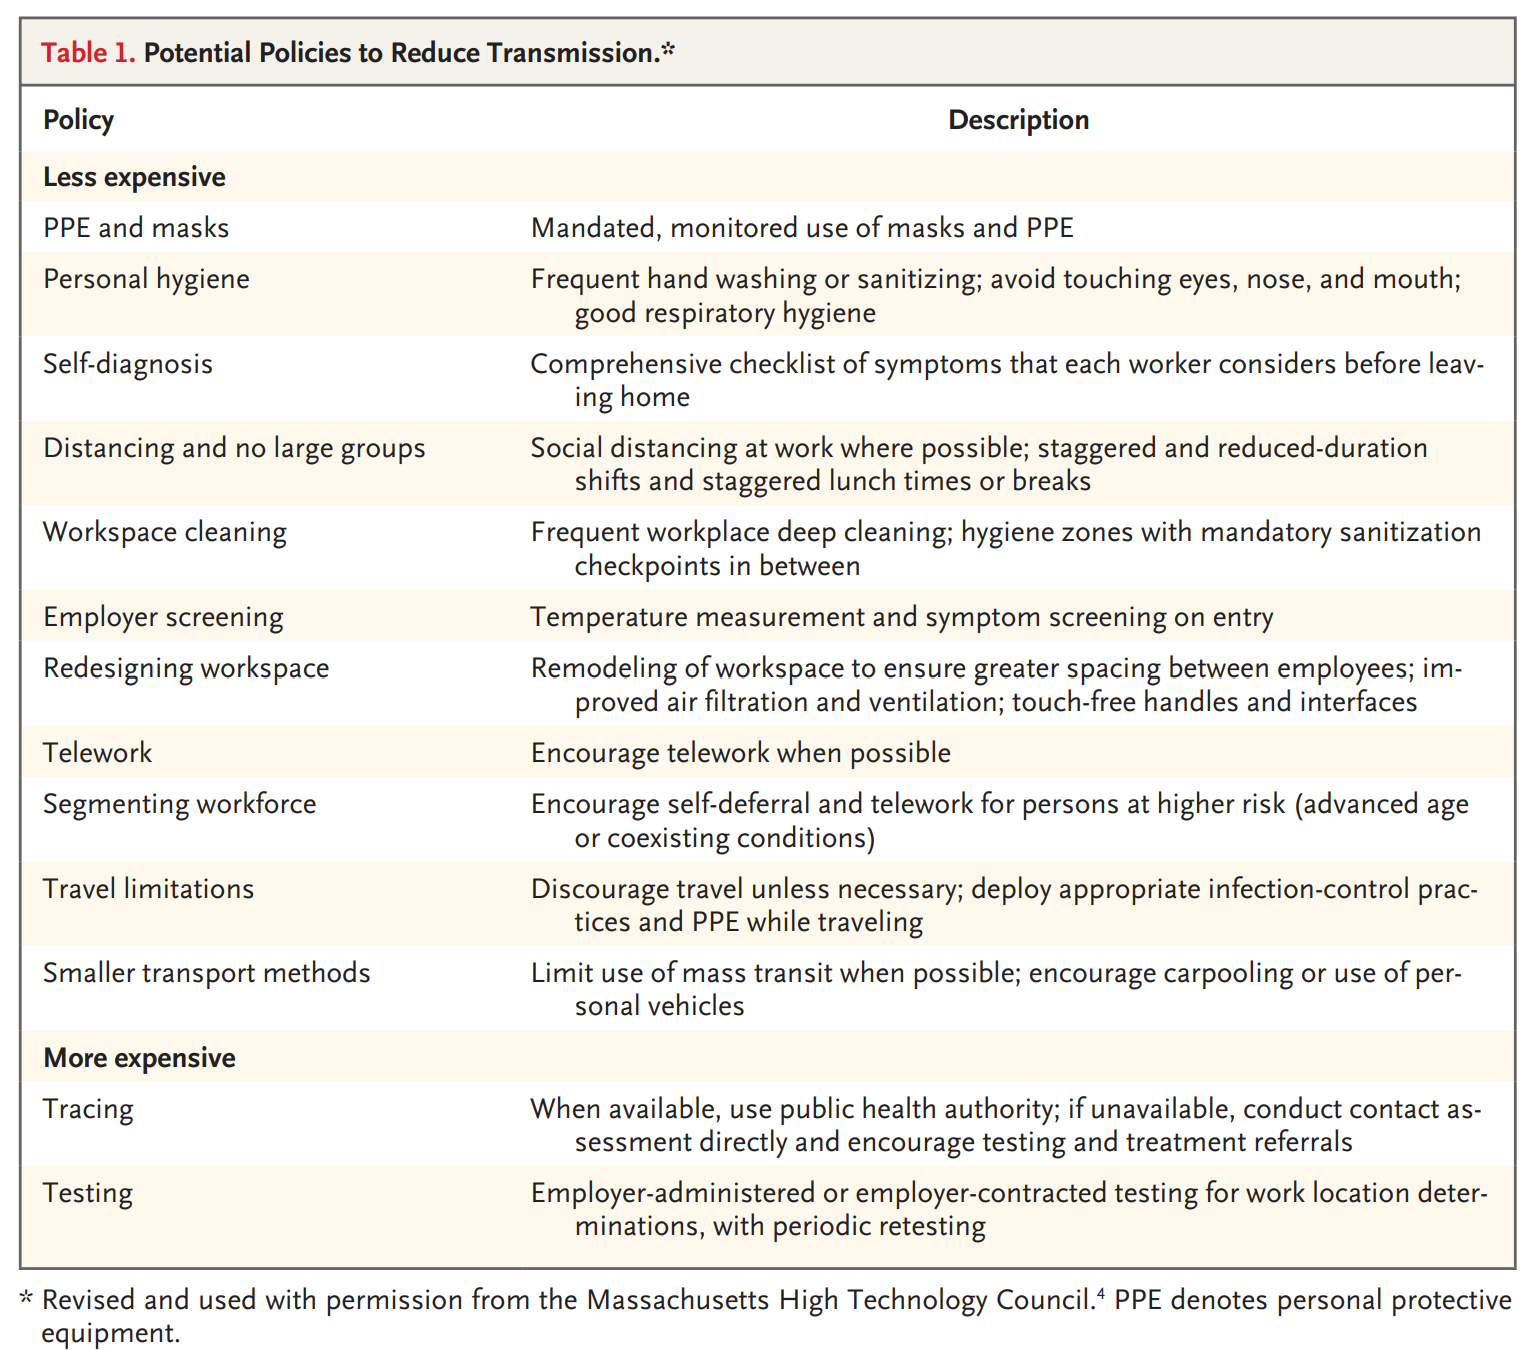 https://smart119.biz/covid-19/images/challenges_of_return_to_work_in_an_ongoing_pandemic_n_engl_j_med_20200608_table1.png